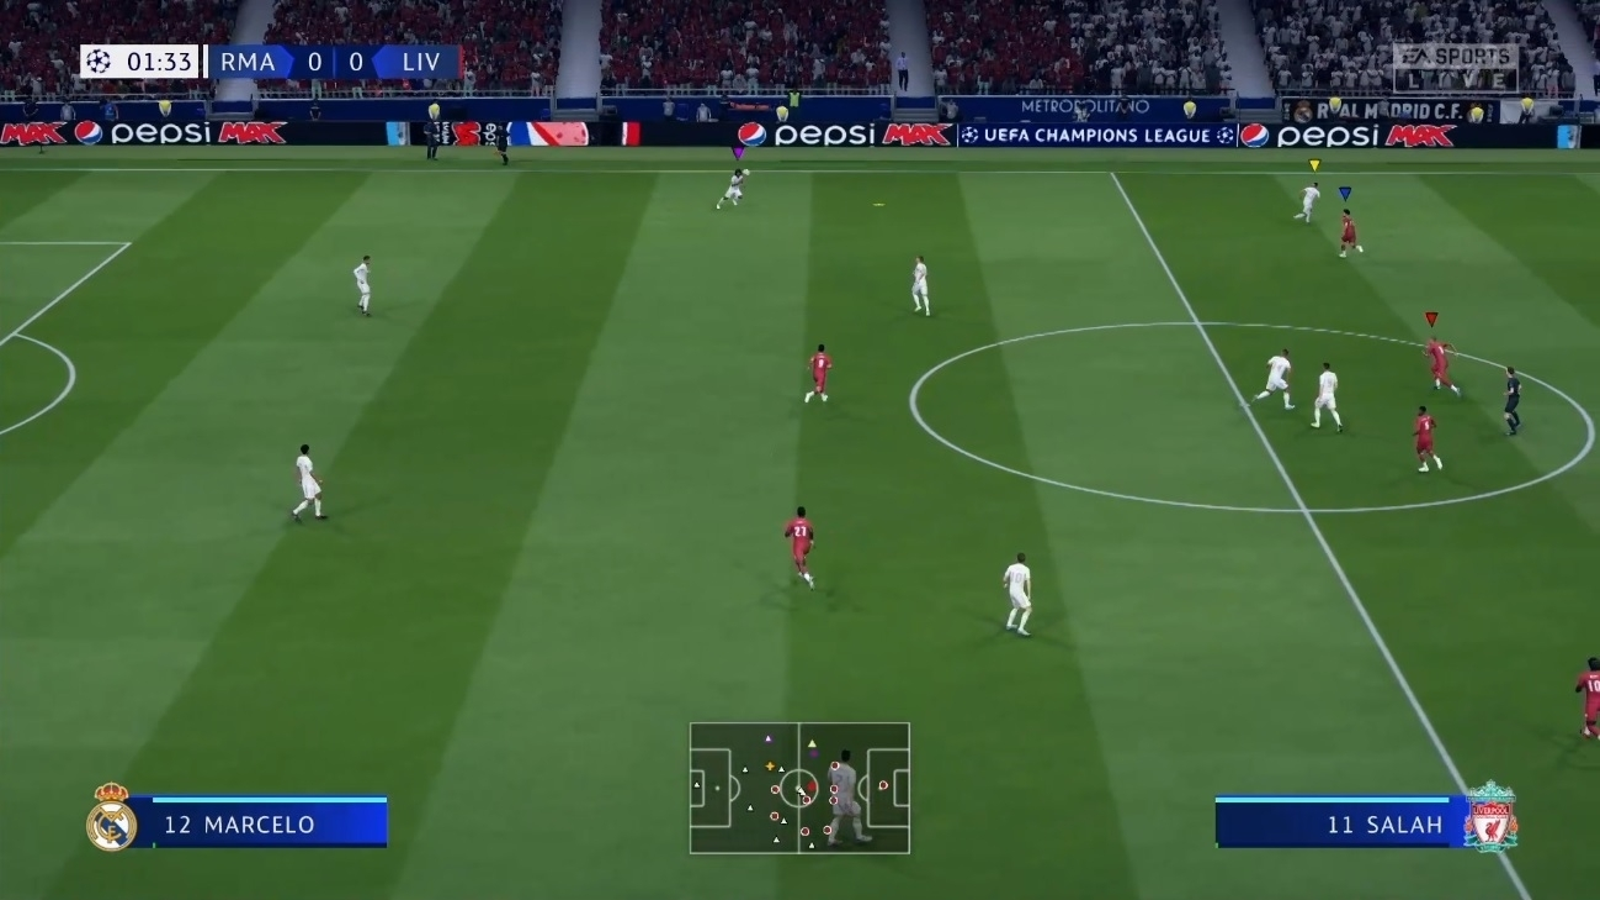 FIFA 20  Official Gameplay Trailer 